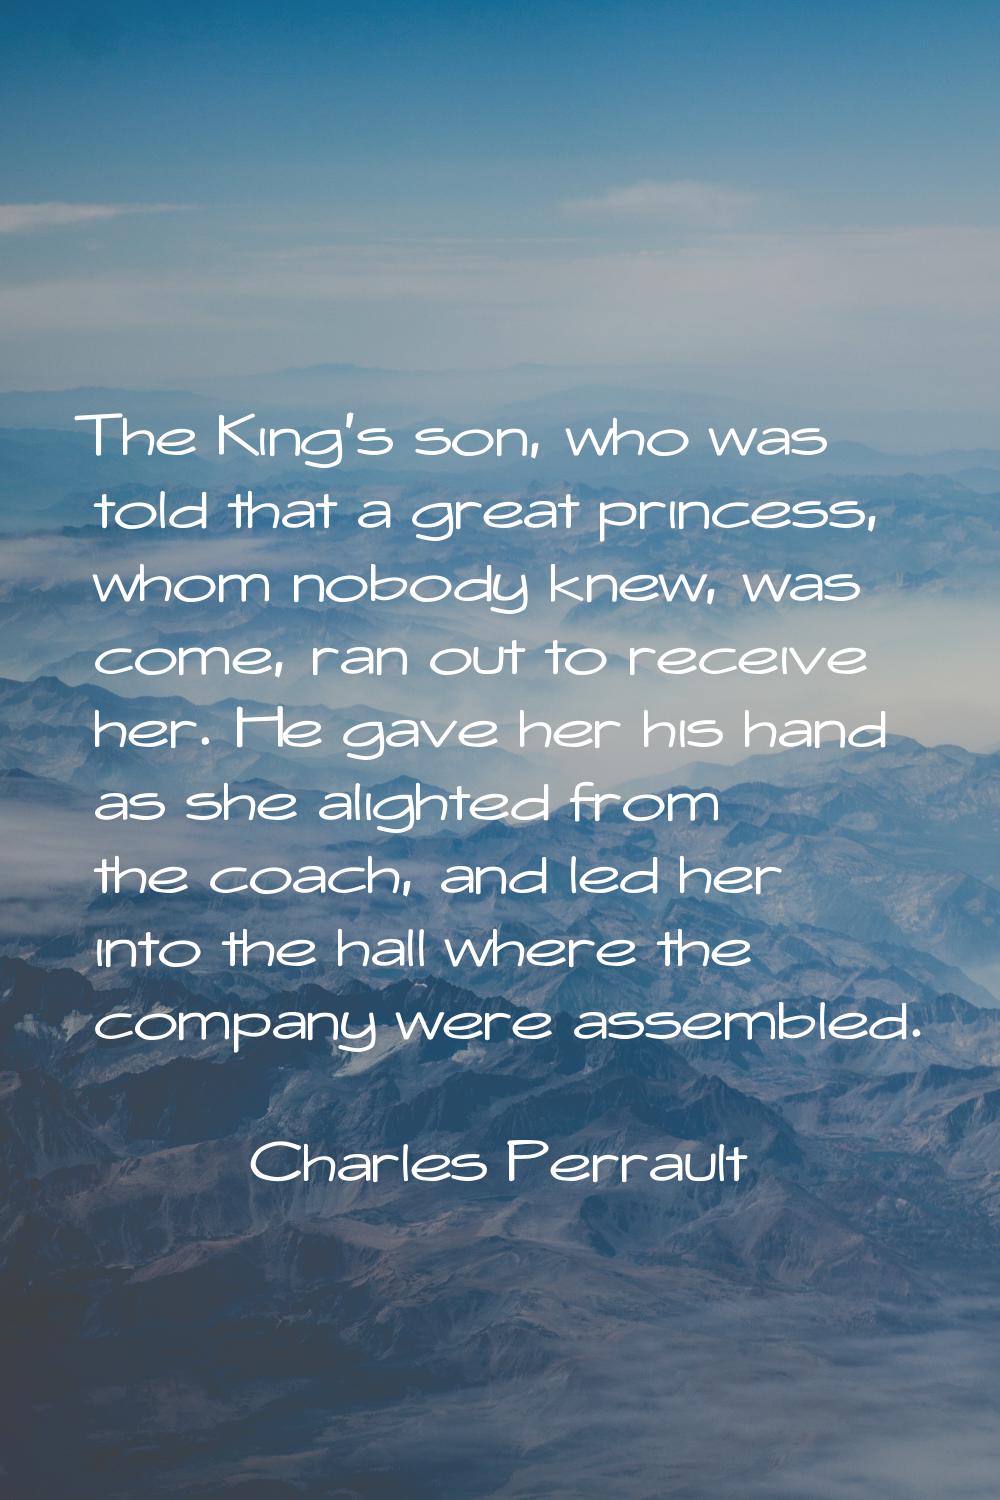 The King's son, who was told that a great princess, whom nobody knew, was come, ran out to receive 